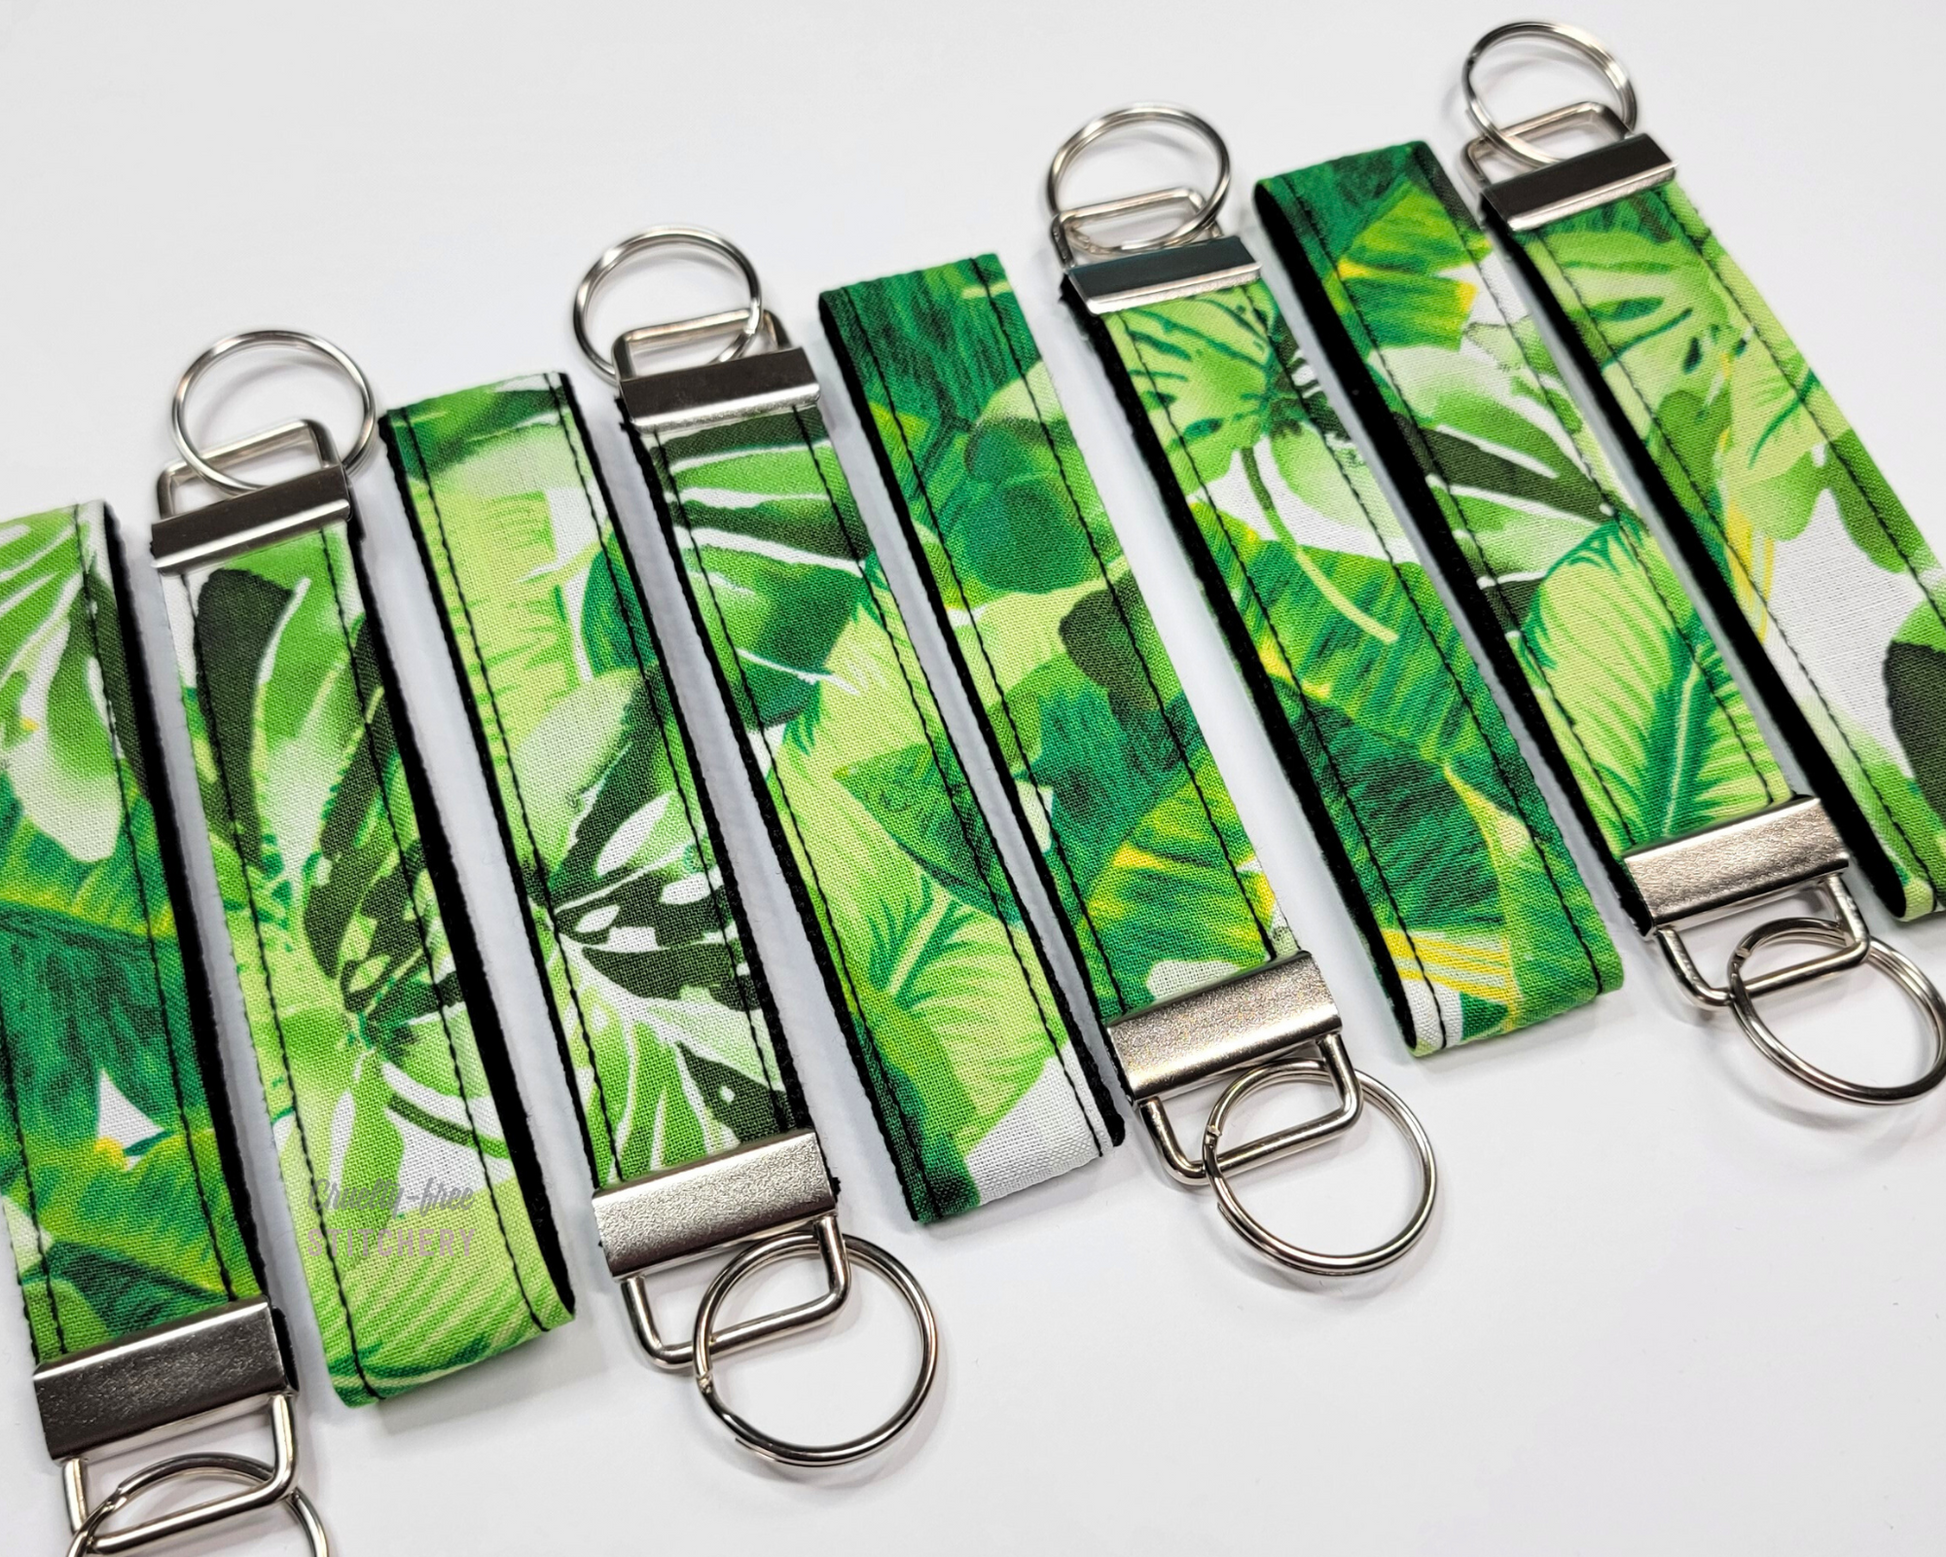 Wristlet key fobs arranged in a row of eight with ends alternating. The wristlet is fabric with large green leaves printed on a barely visible white background. The hardware and key ring are silver.